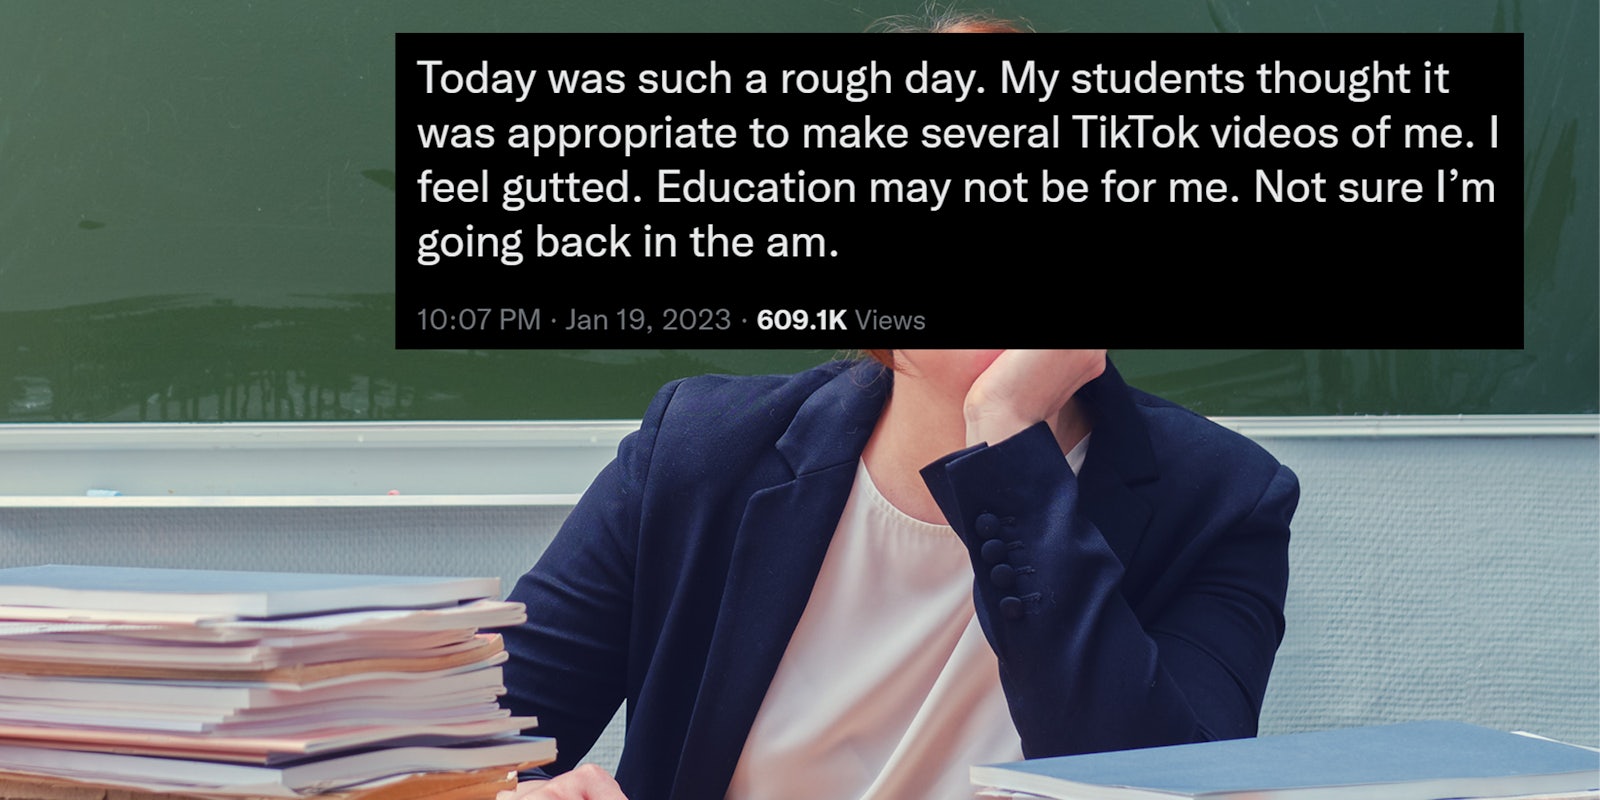 teacher with tweet 'Today was such a rough day. My students thought it was appropriate to make several TikTok videos of me. I feel gutted. Education may not be for me. Not sure I'm going back in the am.'